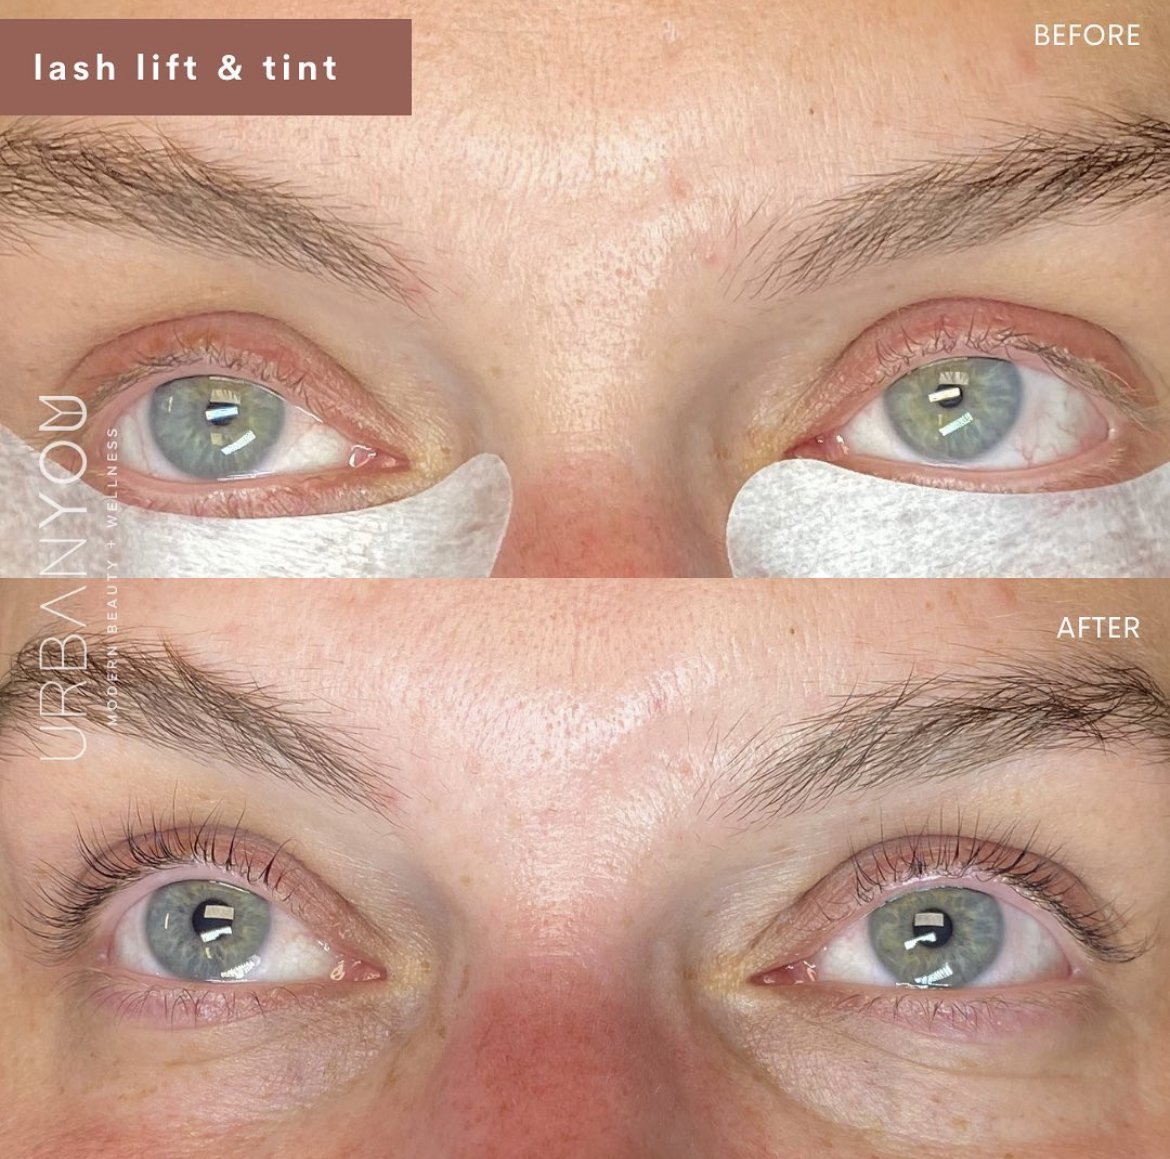 Lash Lift and Tint before and after photo at The Urban You Medical Spa in Grand Rapids